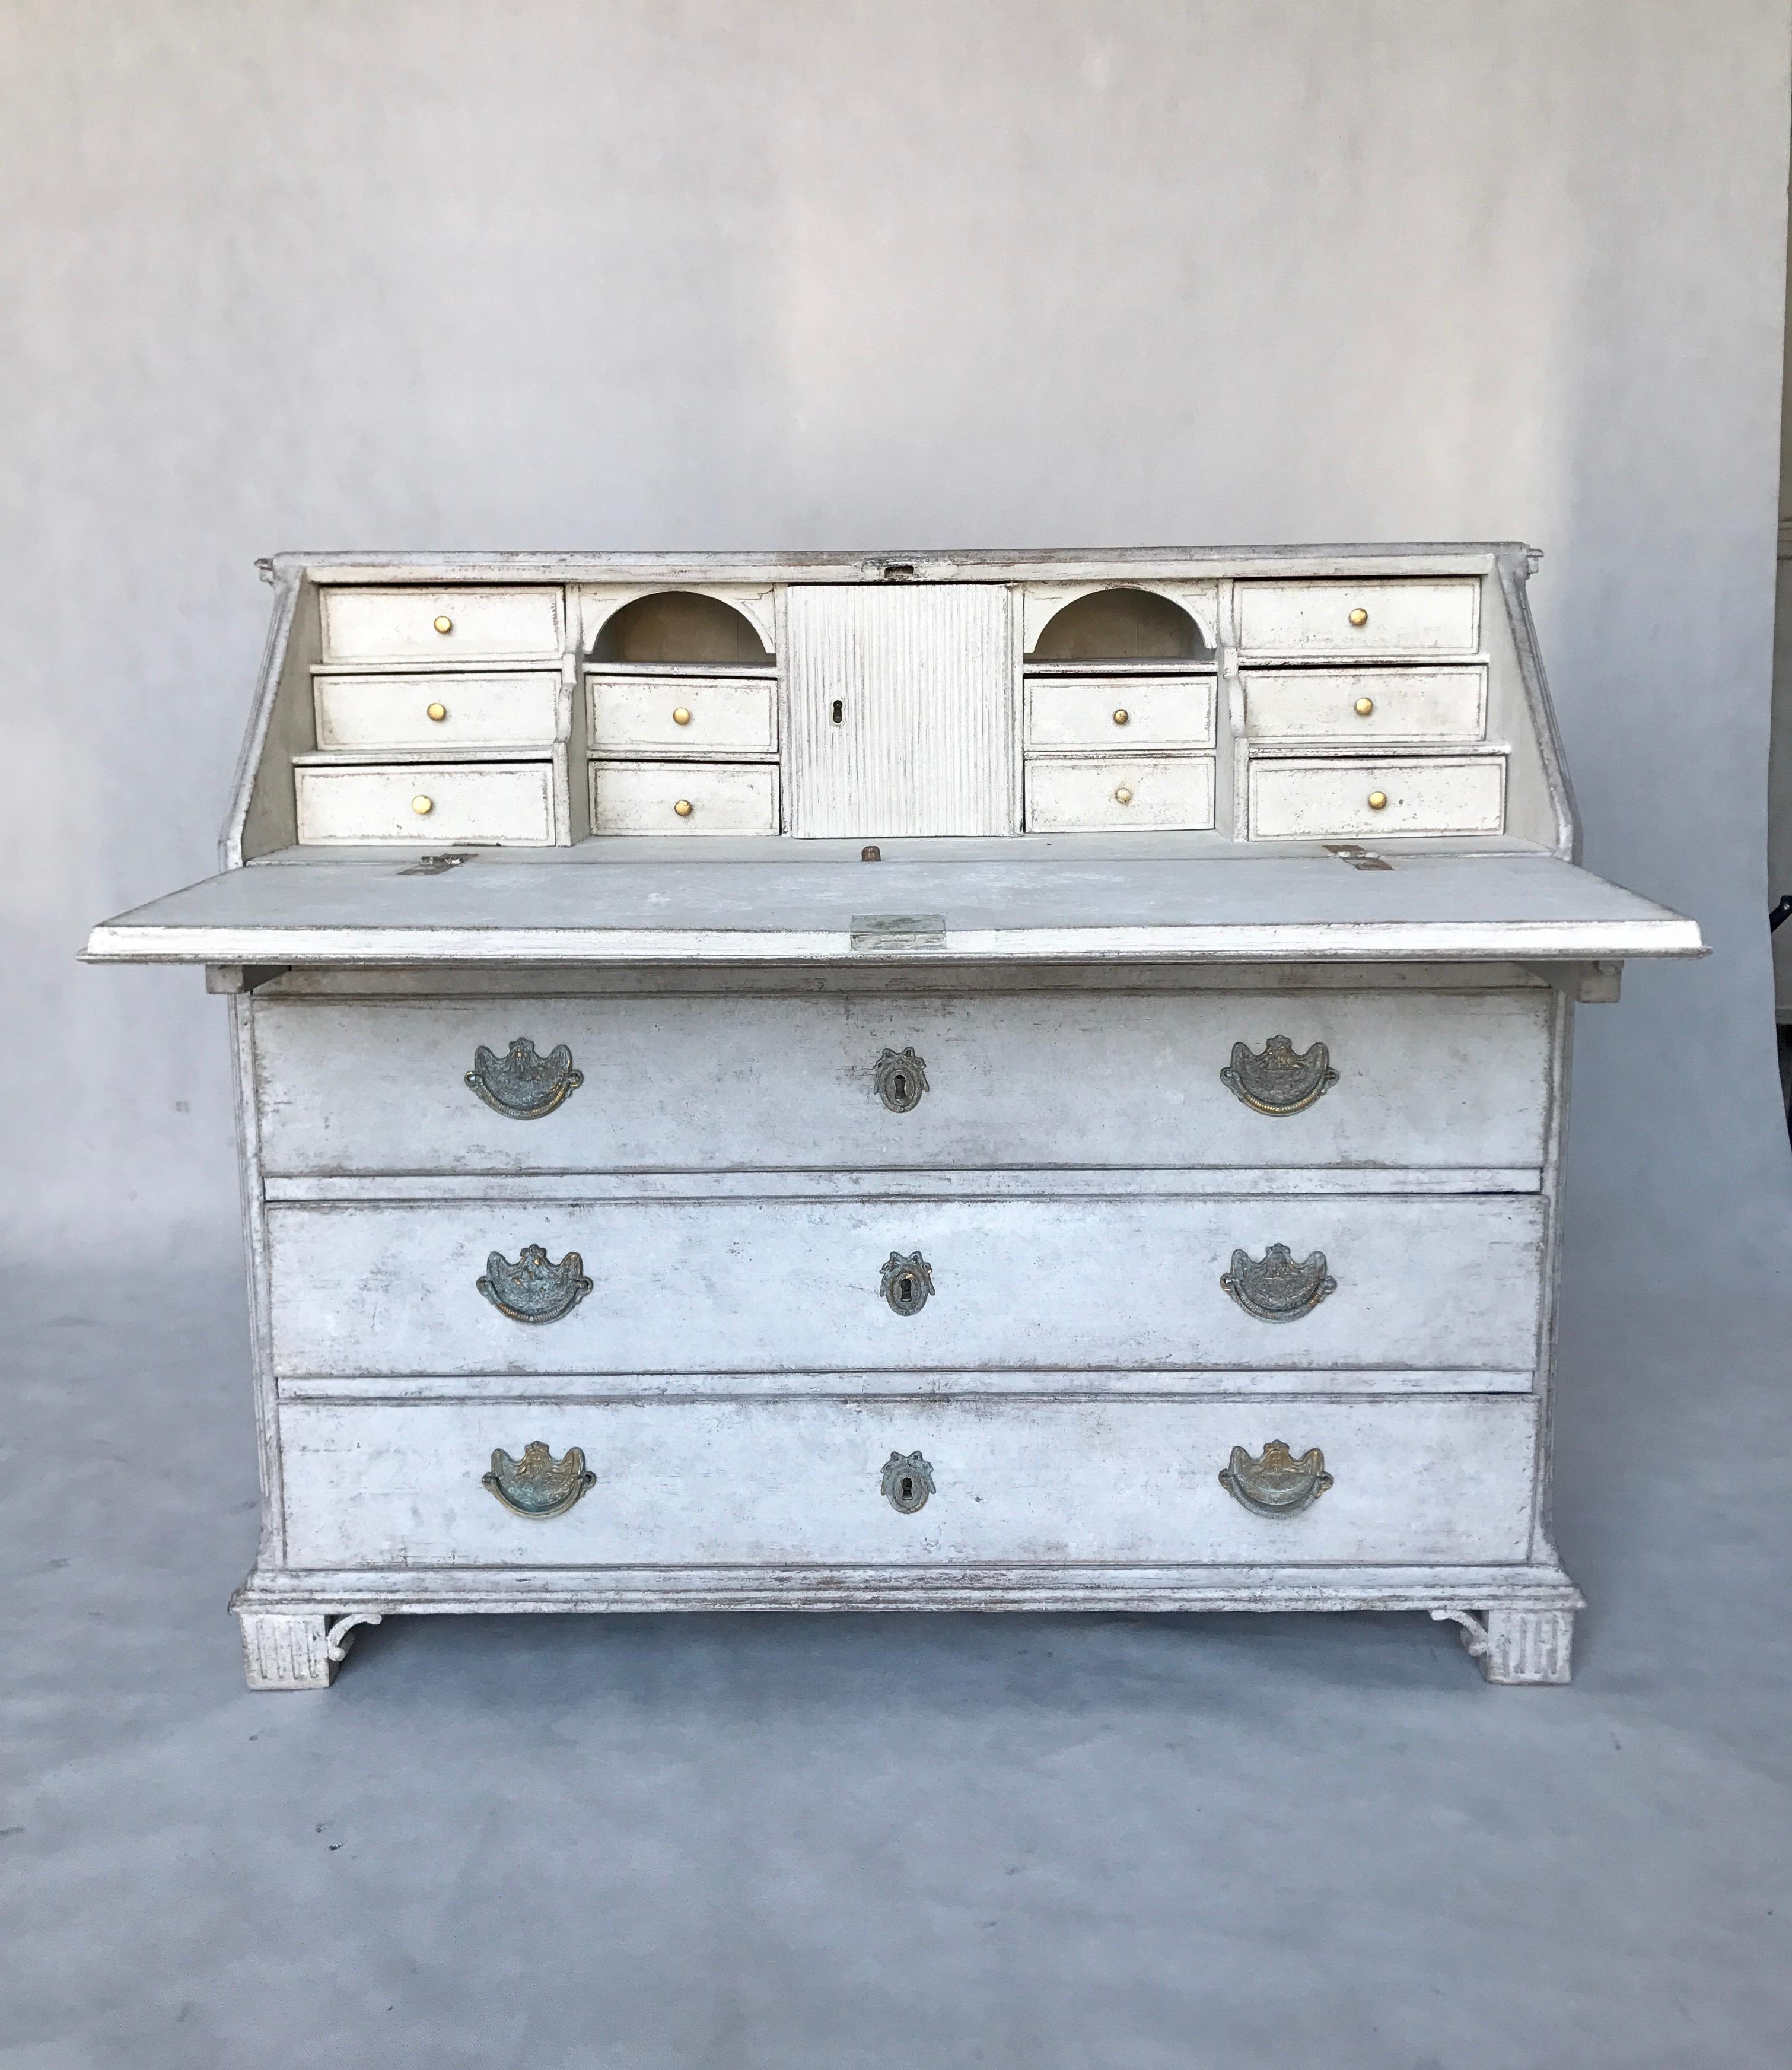 This is an 18th century Gustavian period bureau with a fall front desk featuring a multitude of compartments. It has a slim letter drawer with dentil frieze, three further drawers, decorative shaped bracket feet, original hardware, and locks. This